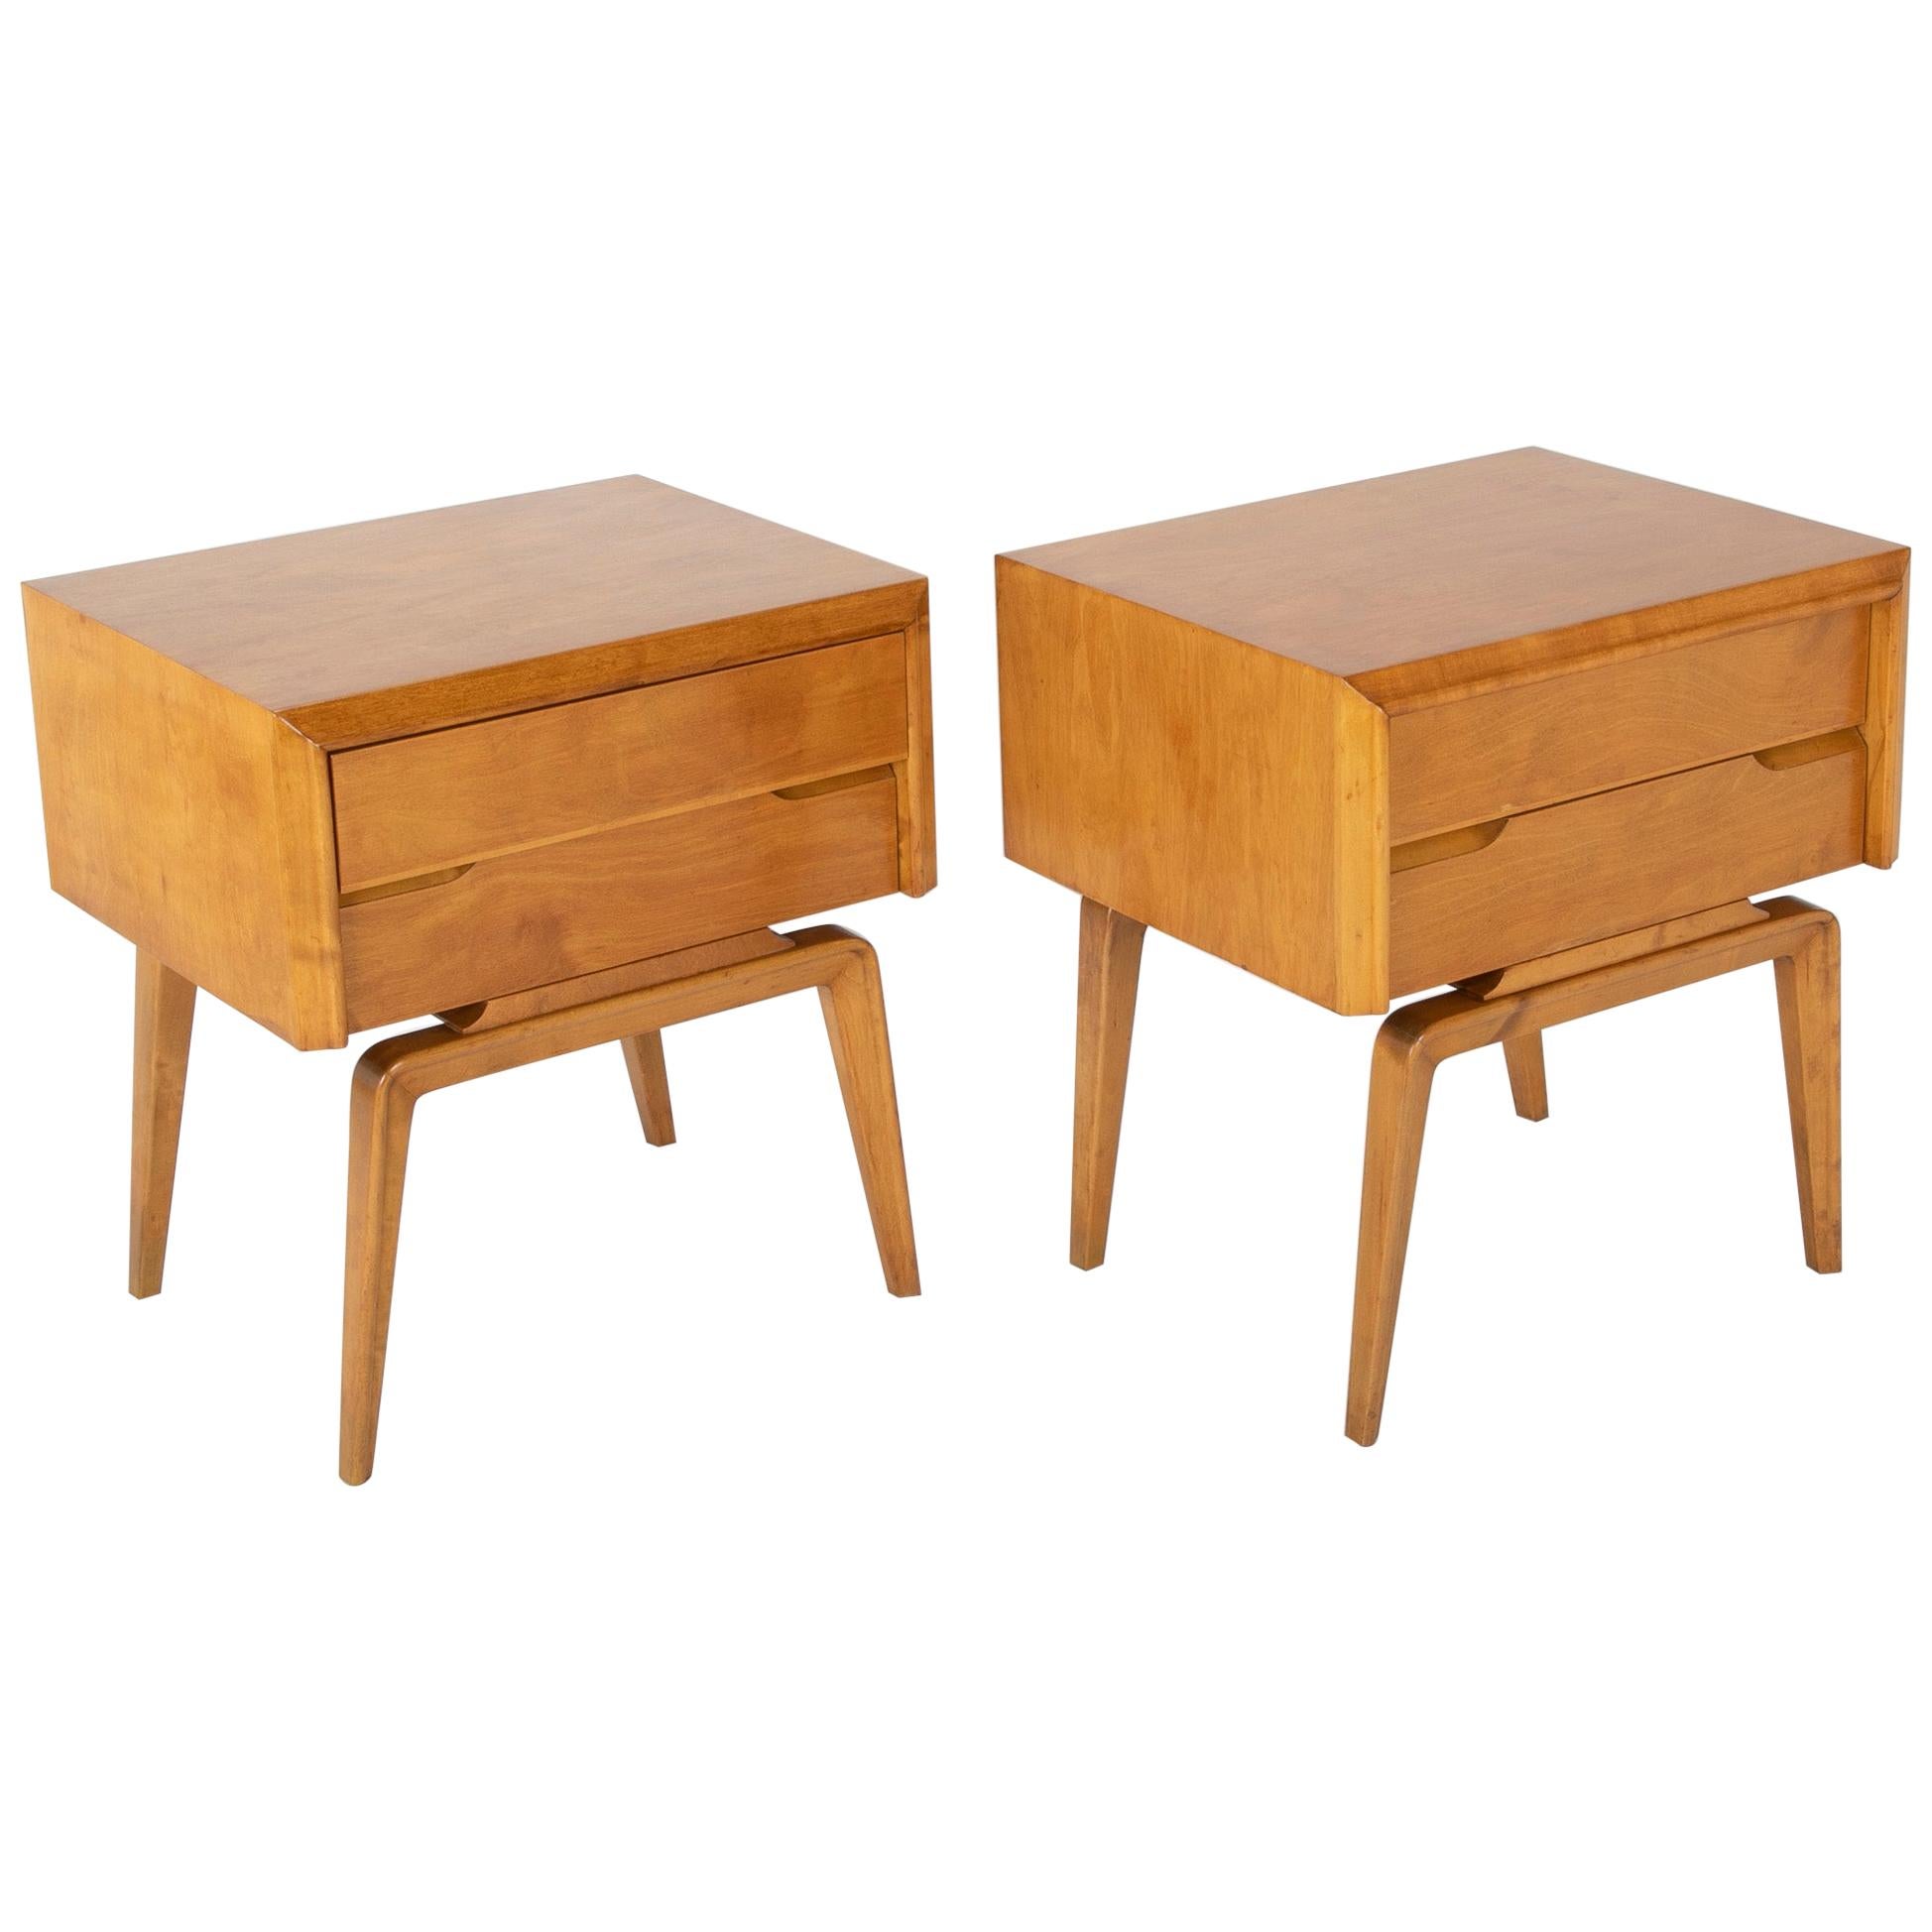 Pair of Maple Side Tables Designed by Edmond Spence